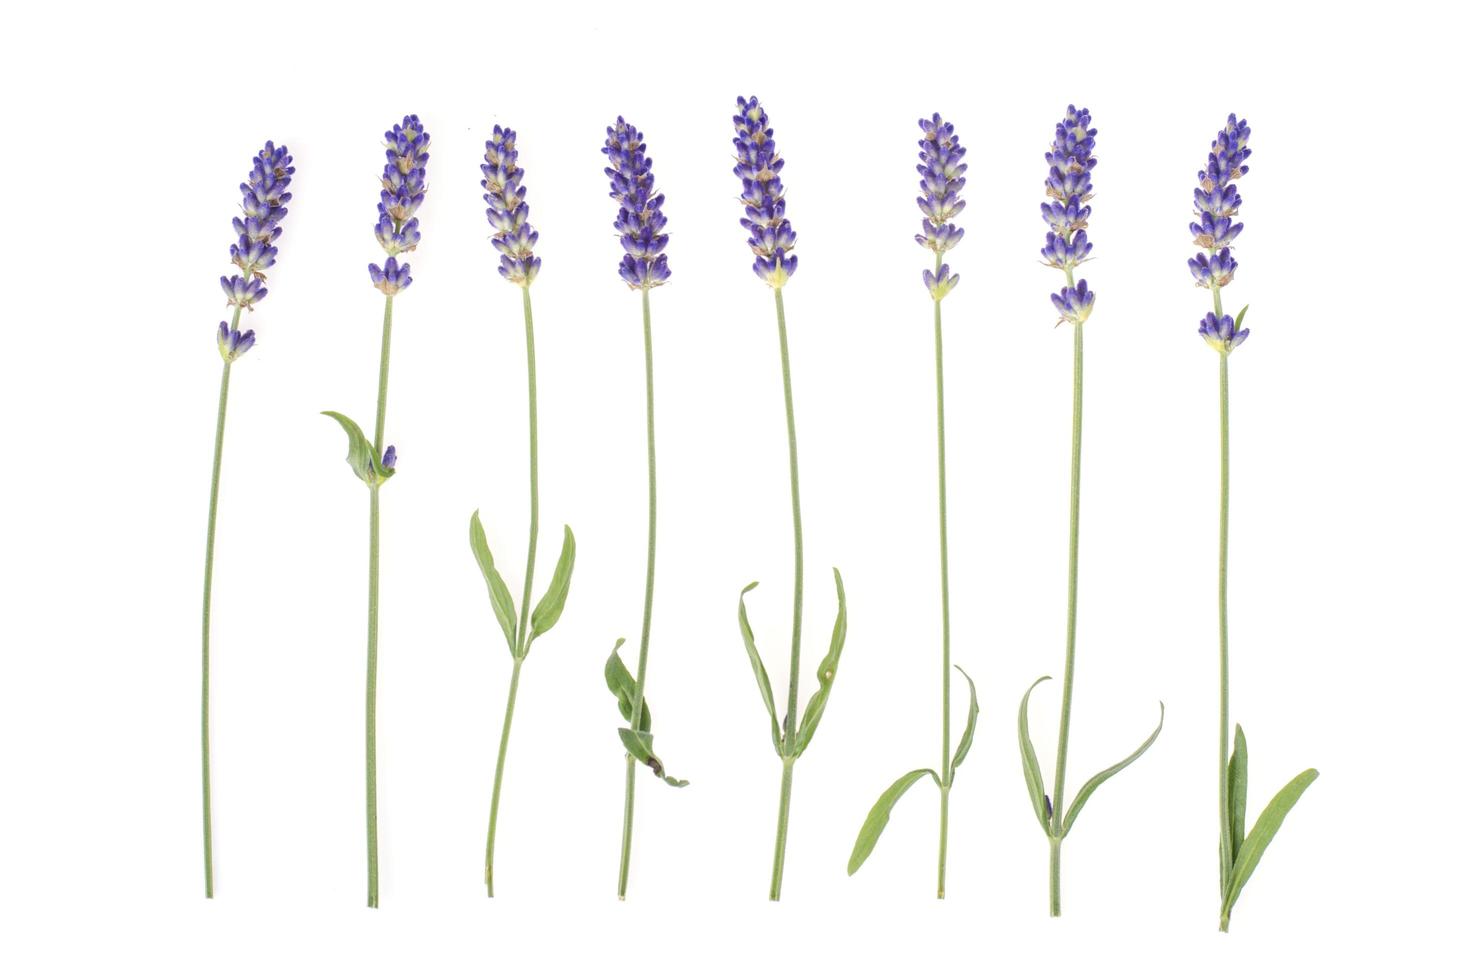 Small bunch of blue lavender flowers. Photo